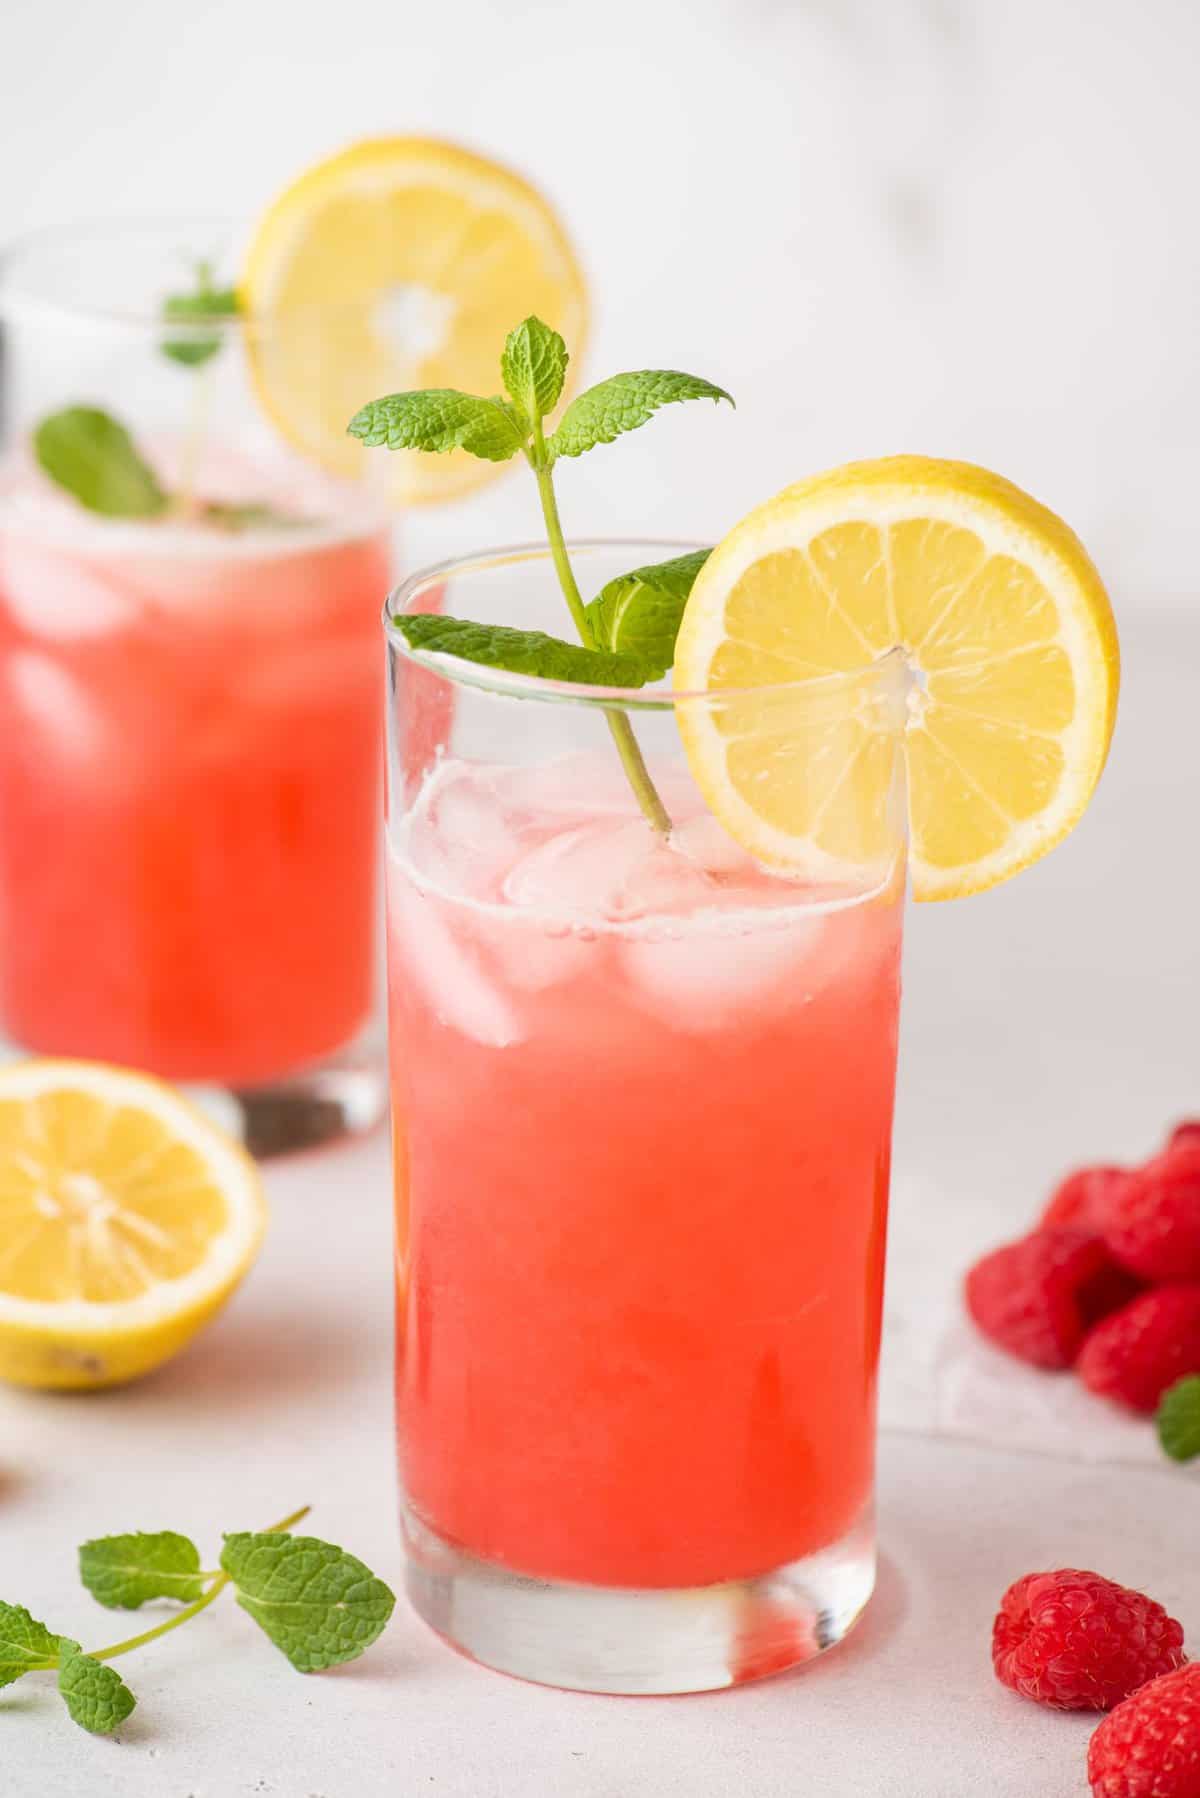 Glass of raspberry lemonade with sprig of mint and slice of lemon